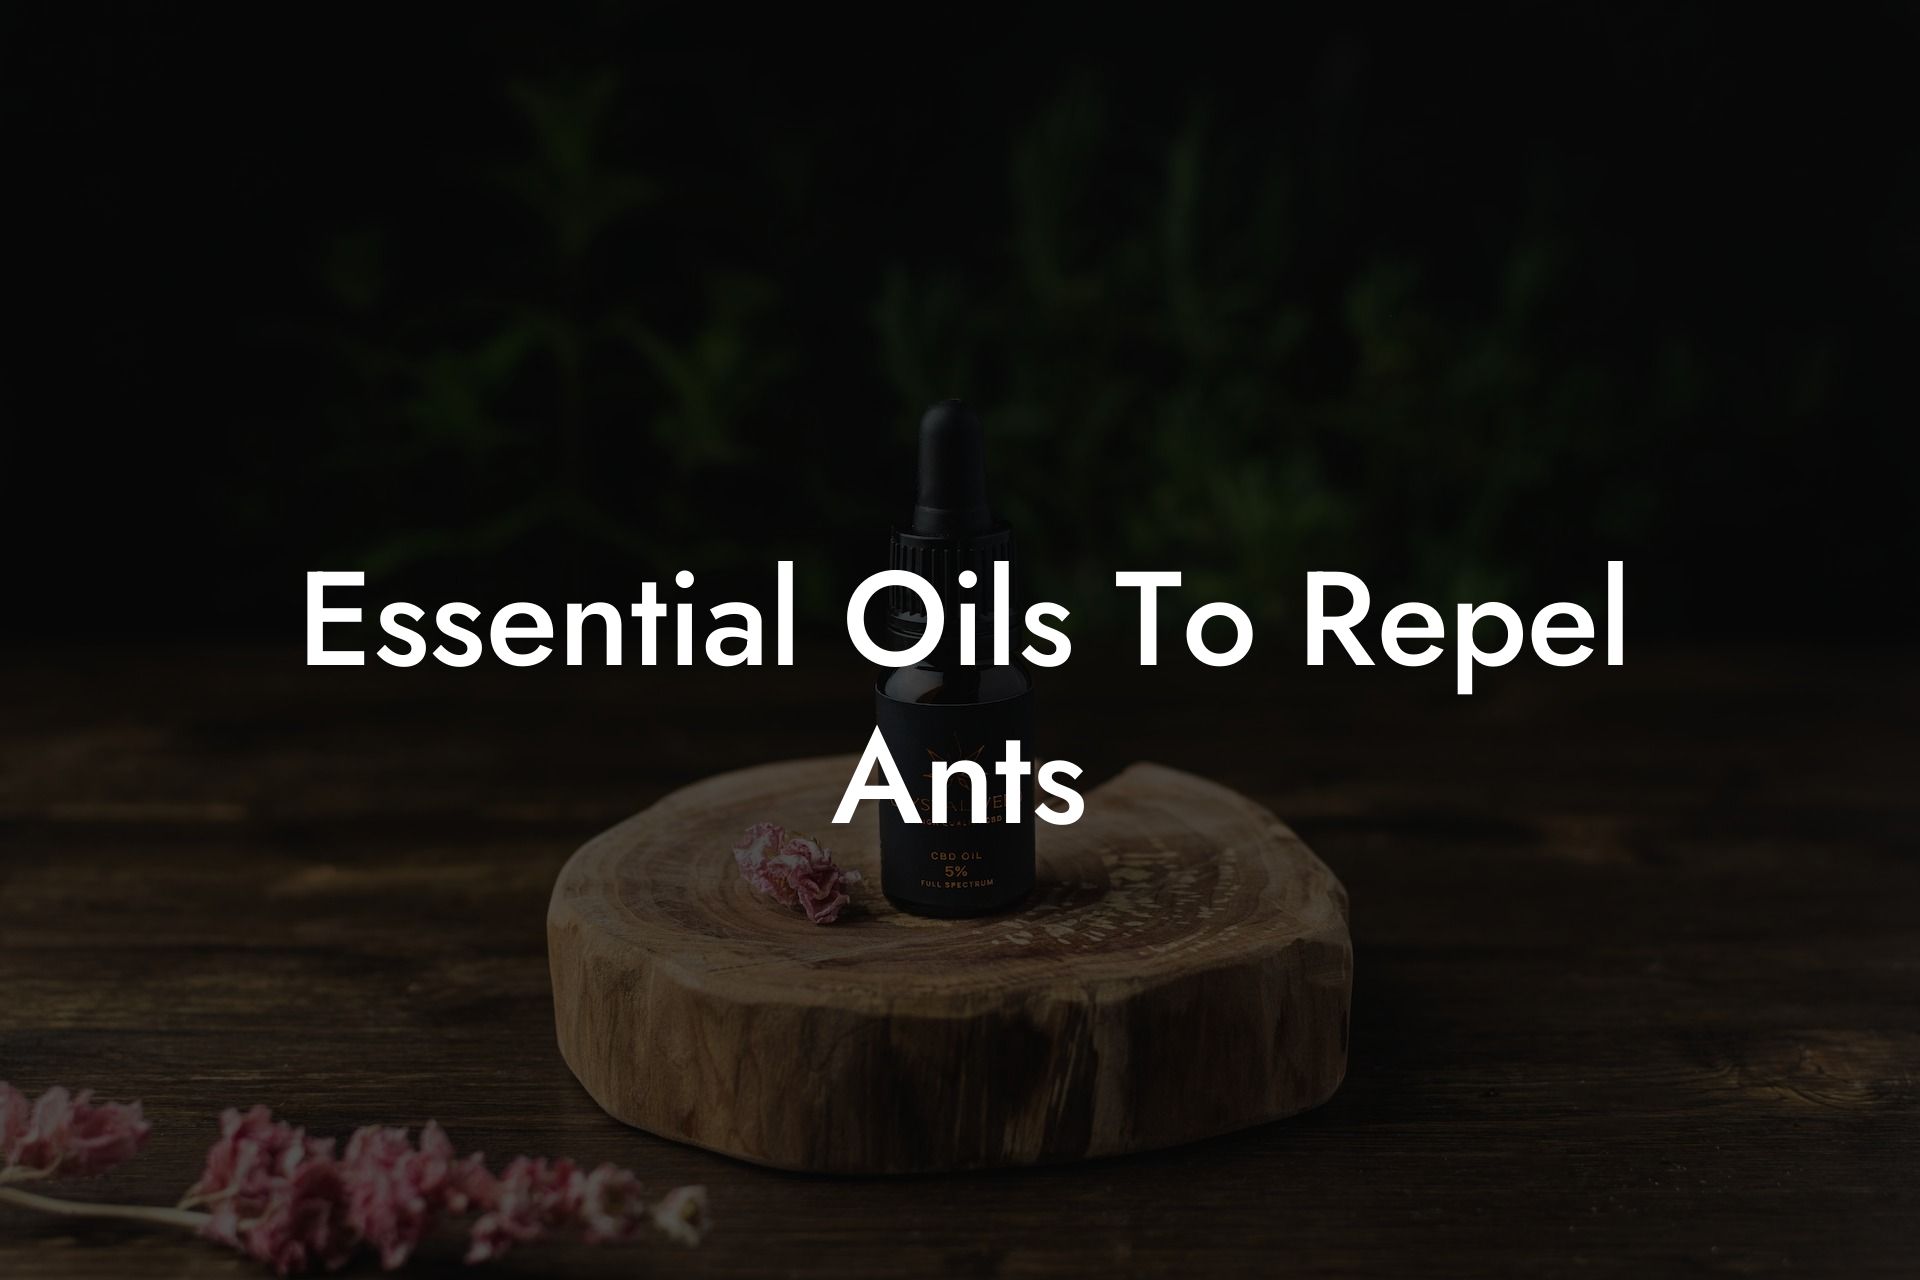 Essential Oils To Repel Ants